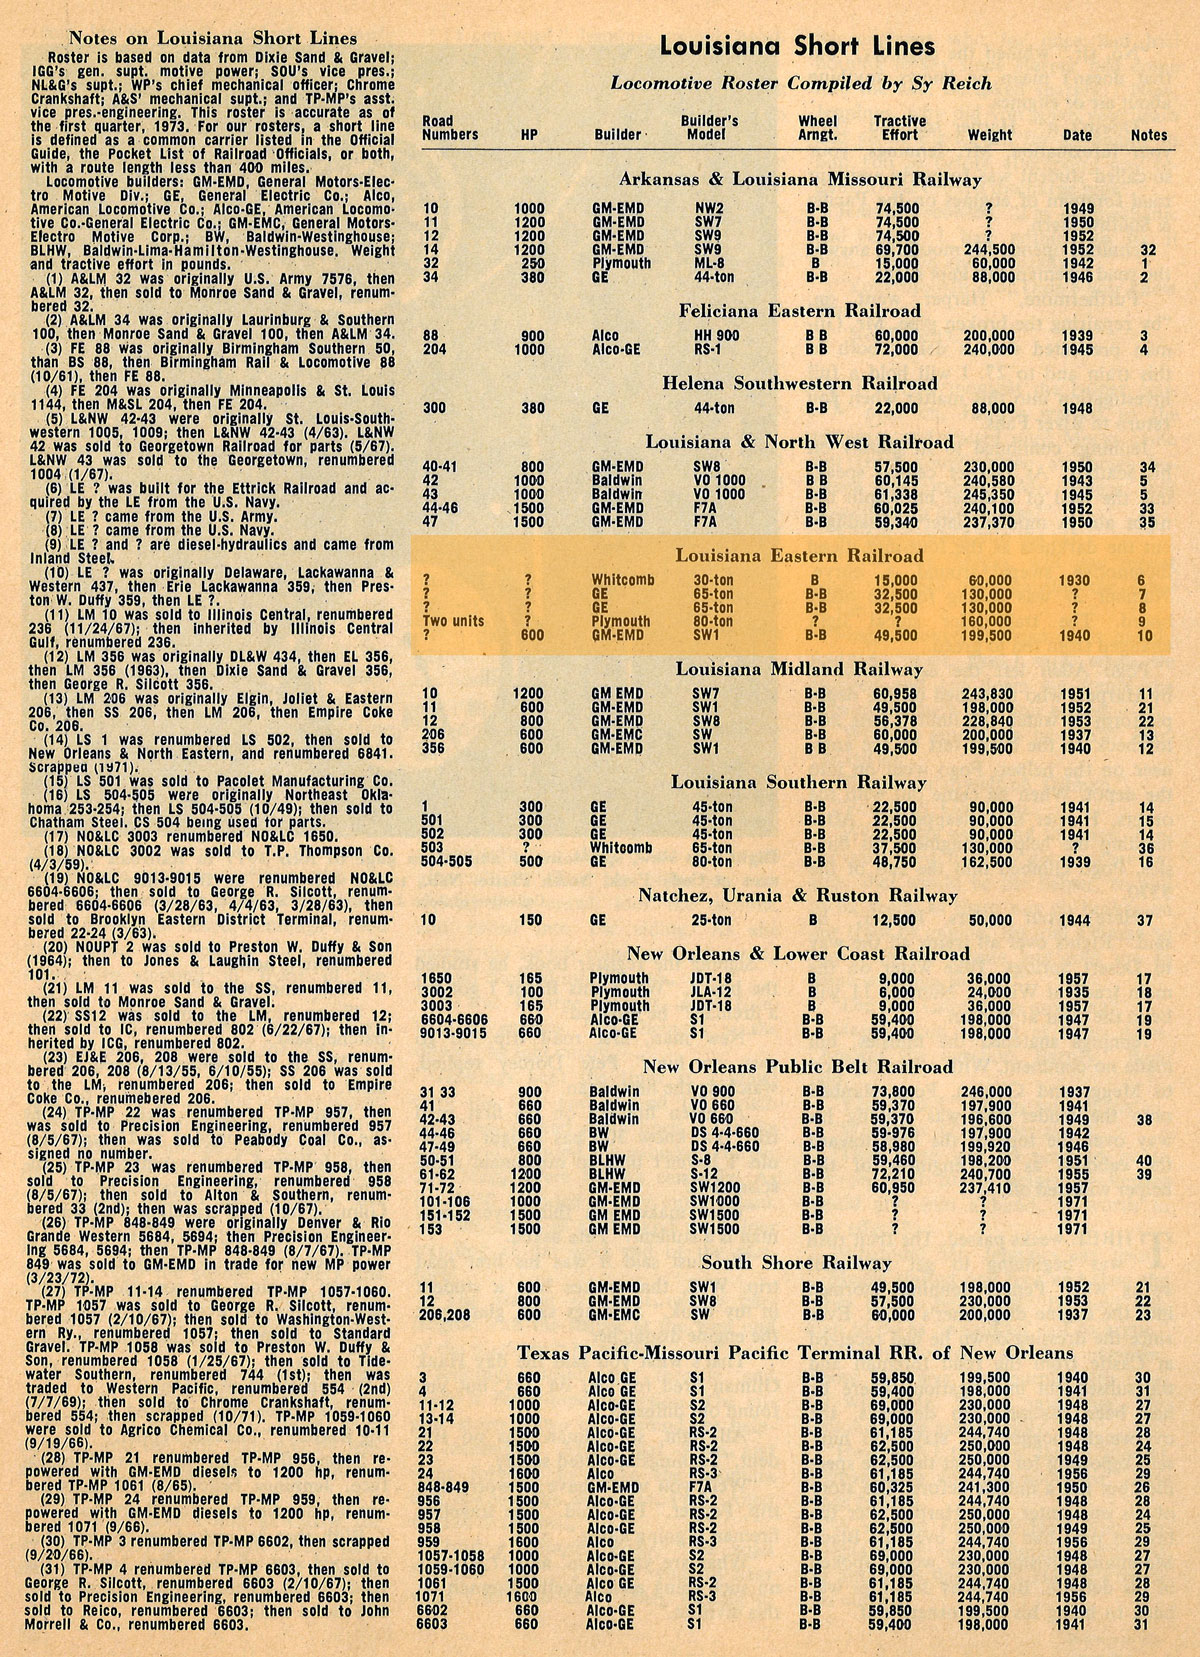 le_roster_clipping1973